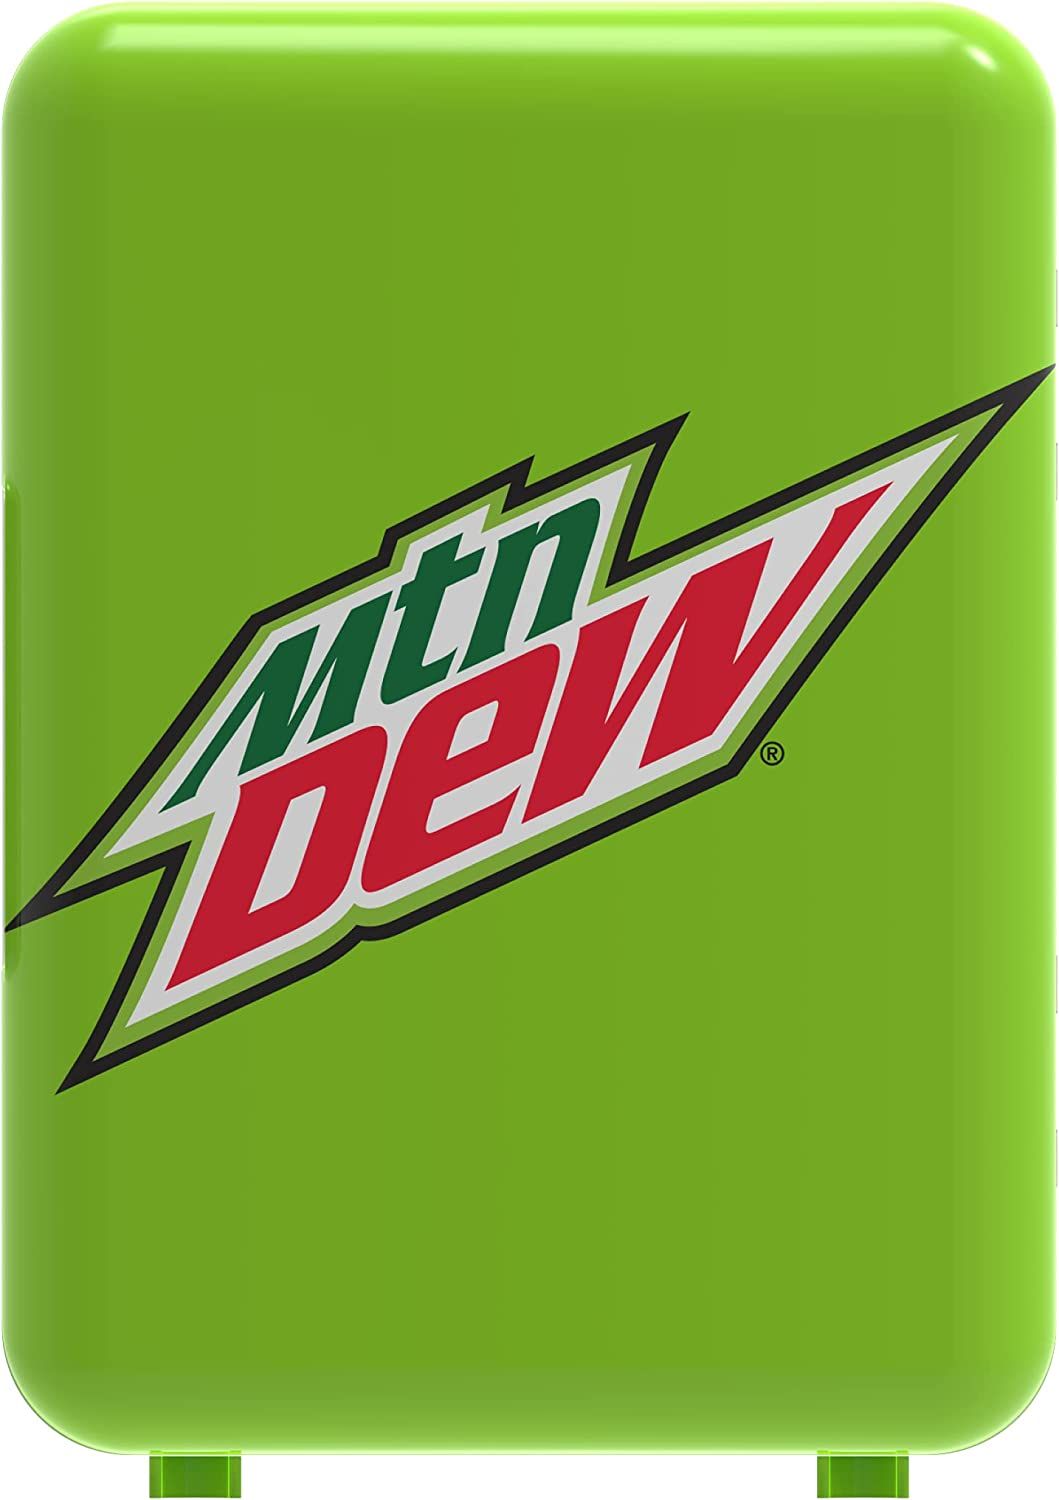 CURTIS Mountain Dew Compact Personal Fridge